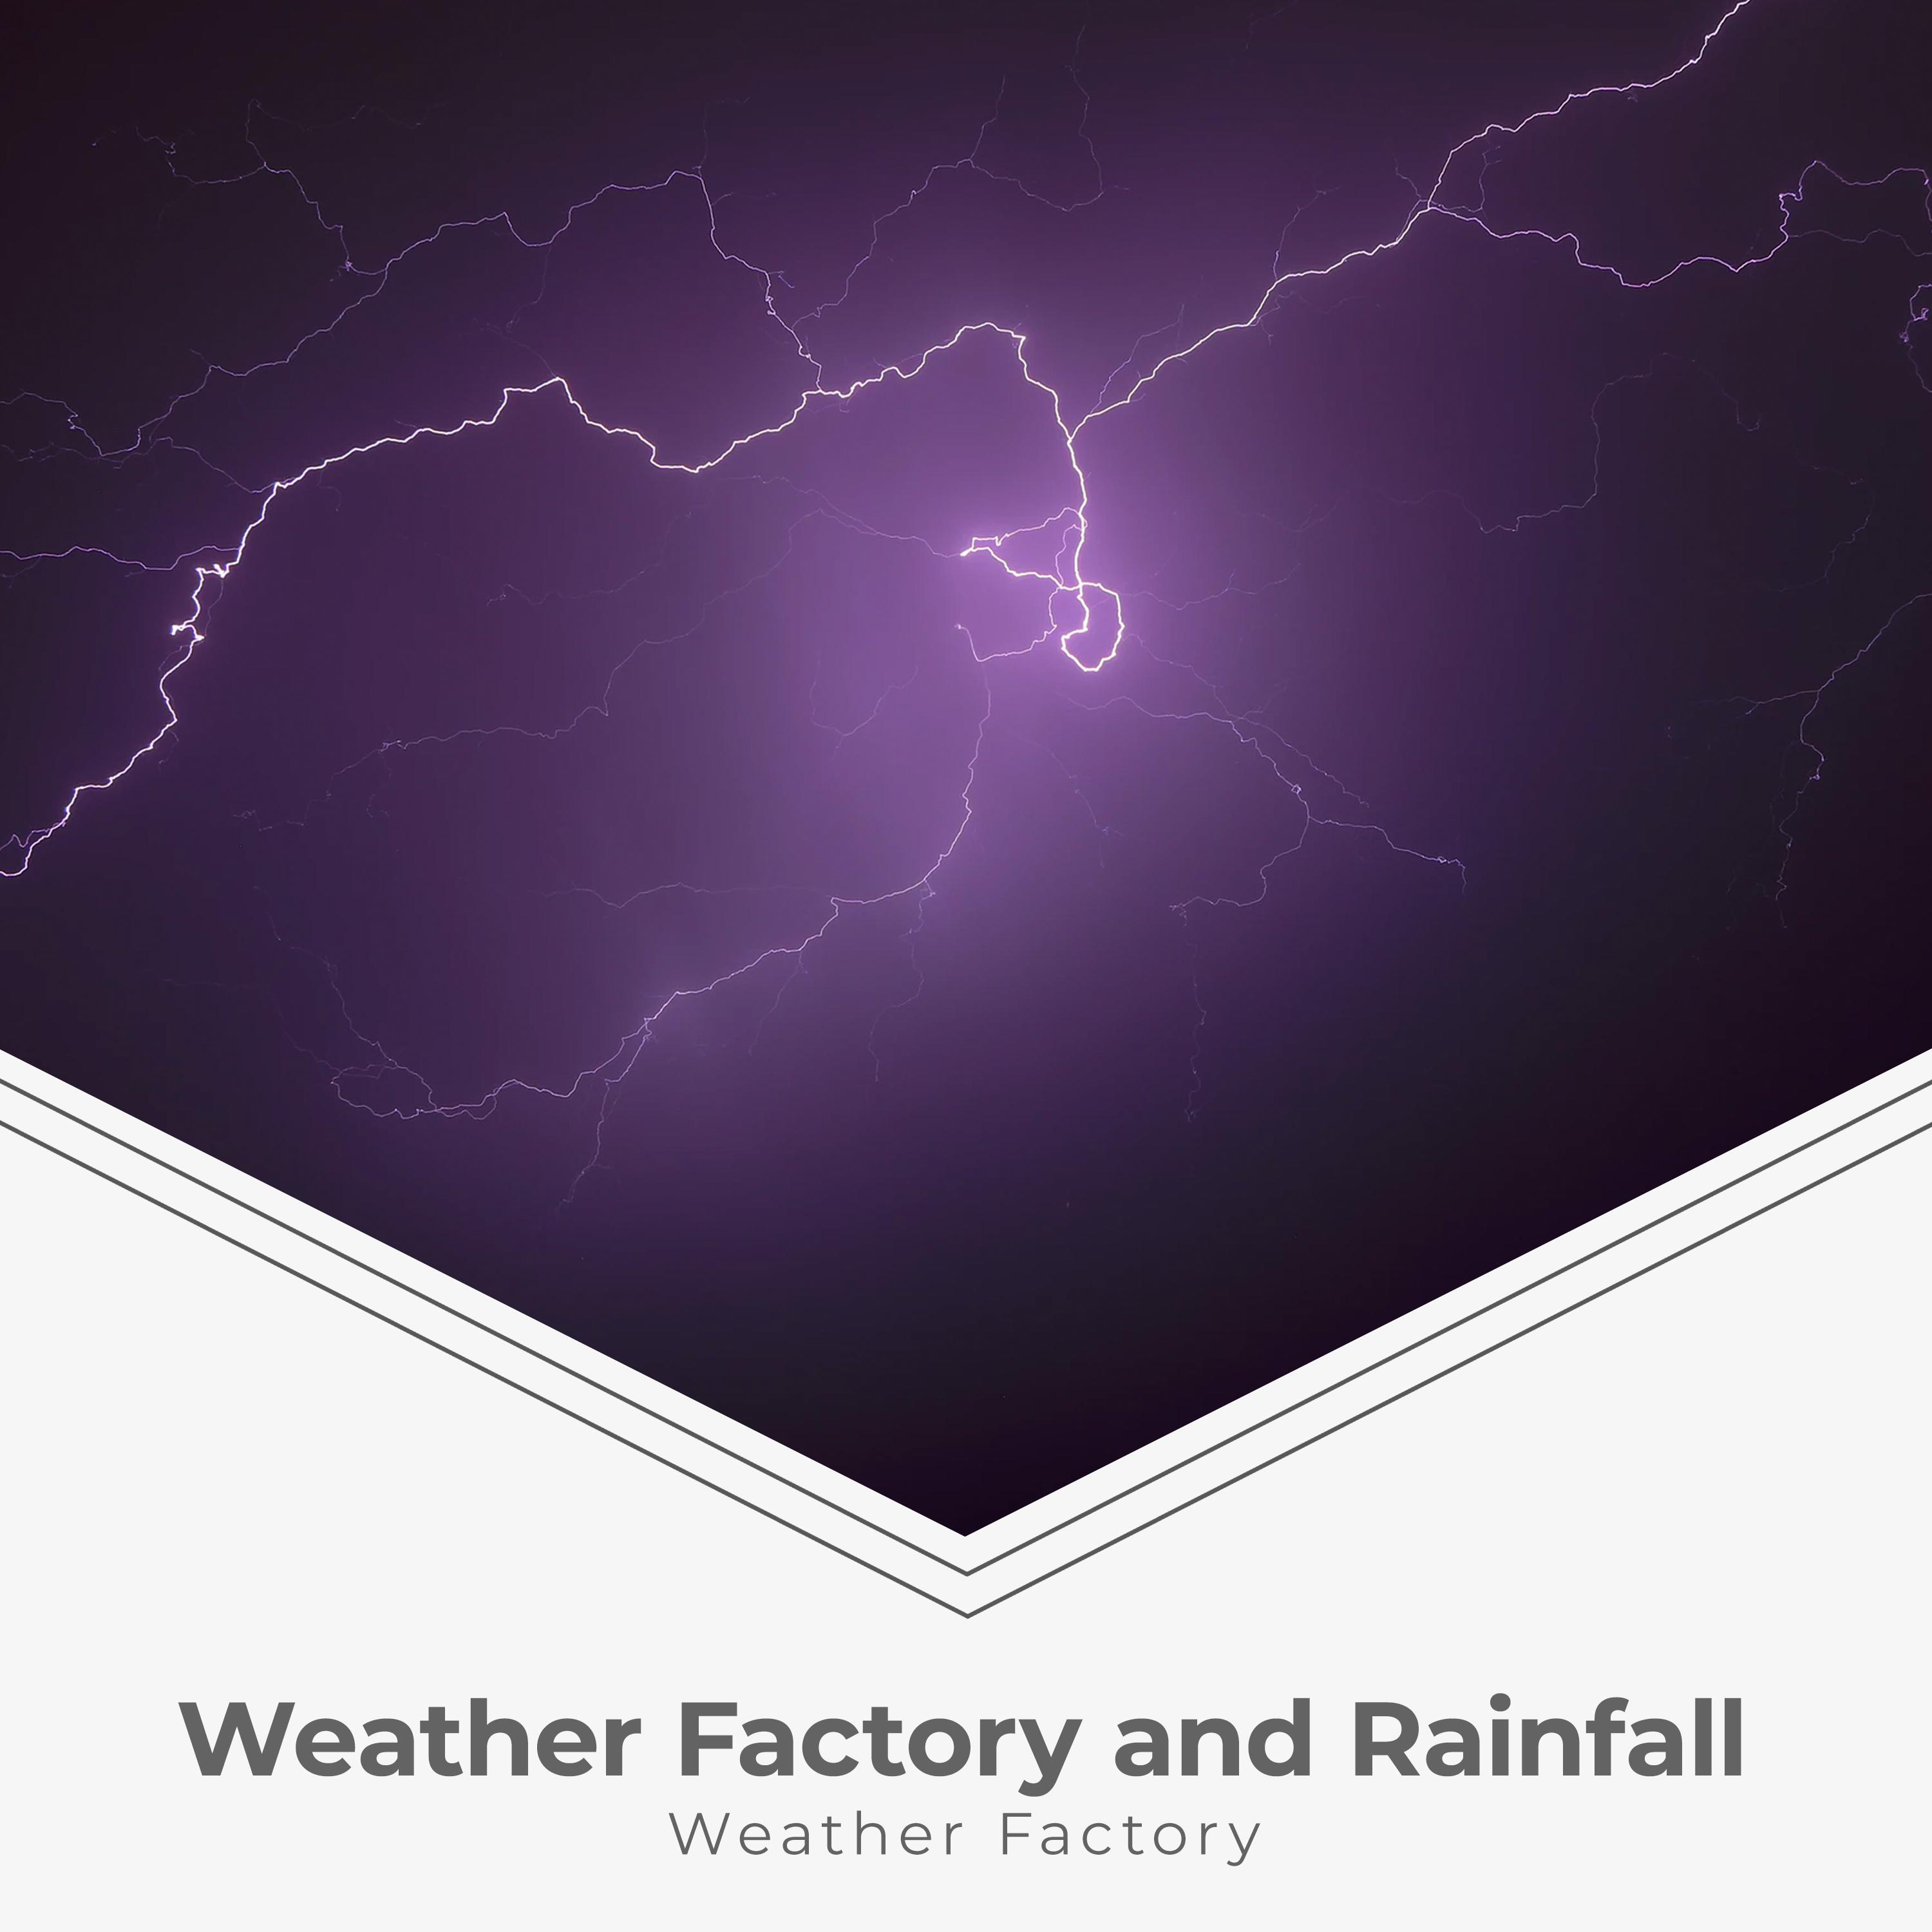 Weather Factory and Rainfall